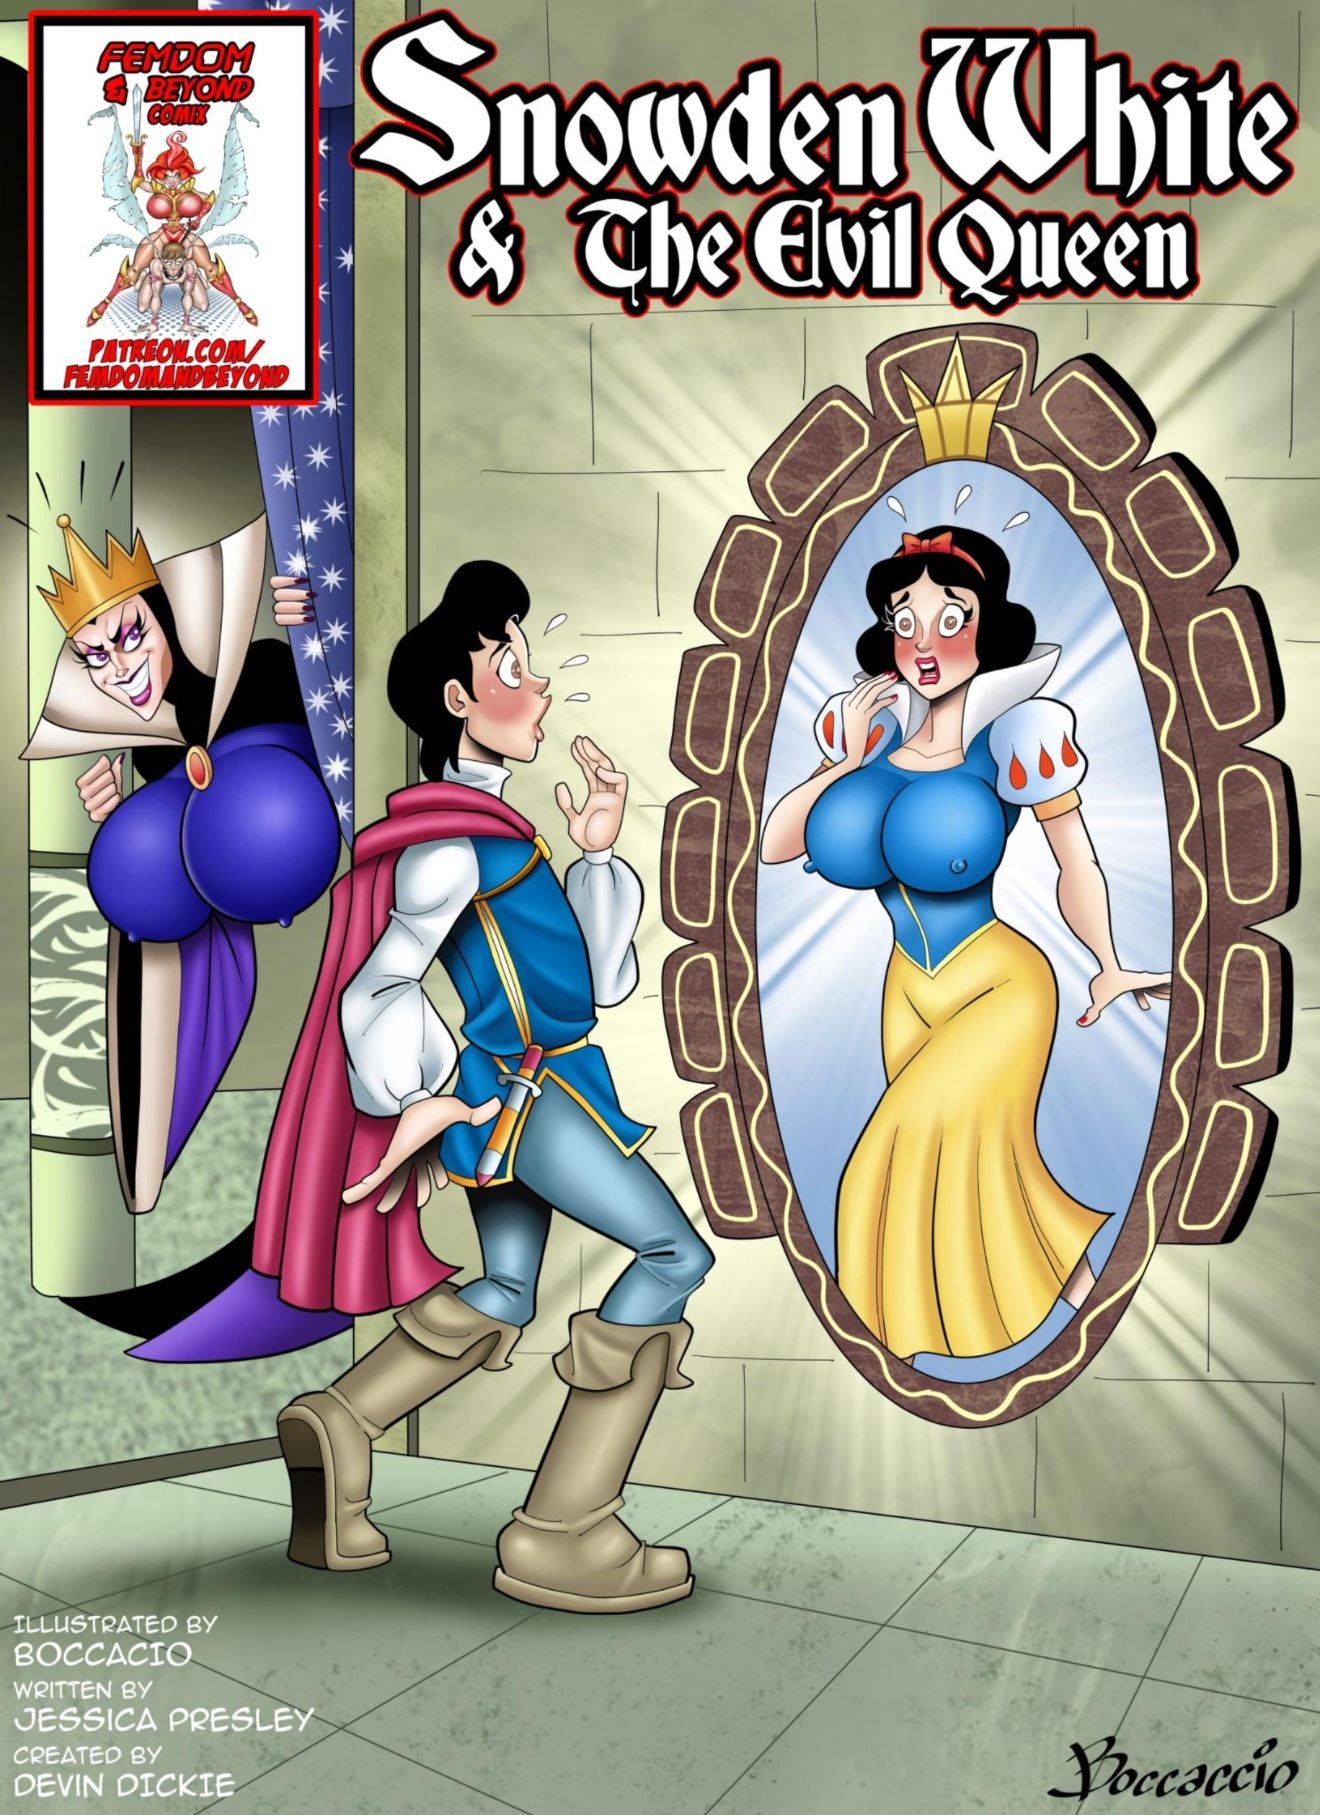 Snowden White and The Evil Queen by Devin Dickie